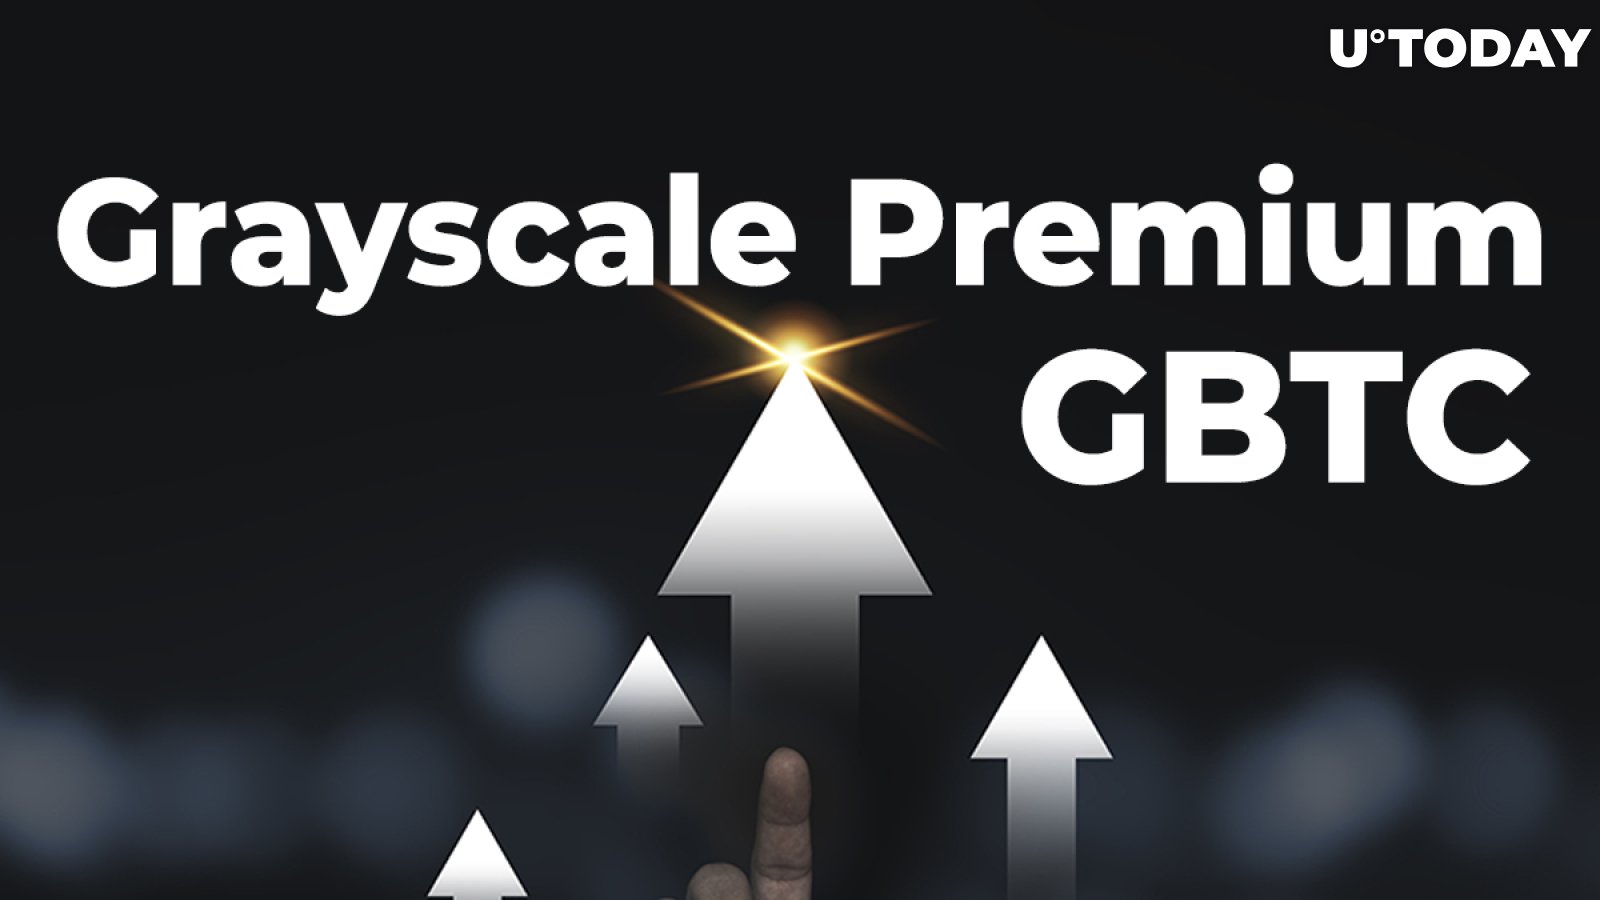 Grayscale GBTC Premium Goes Flat Above Zero, Here's What It Means